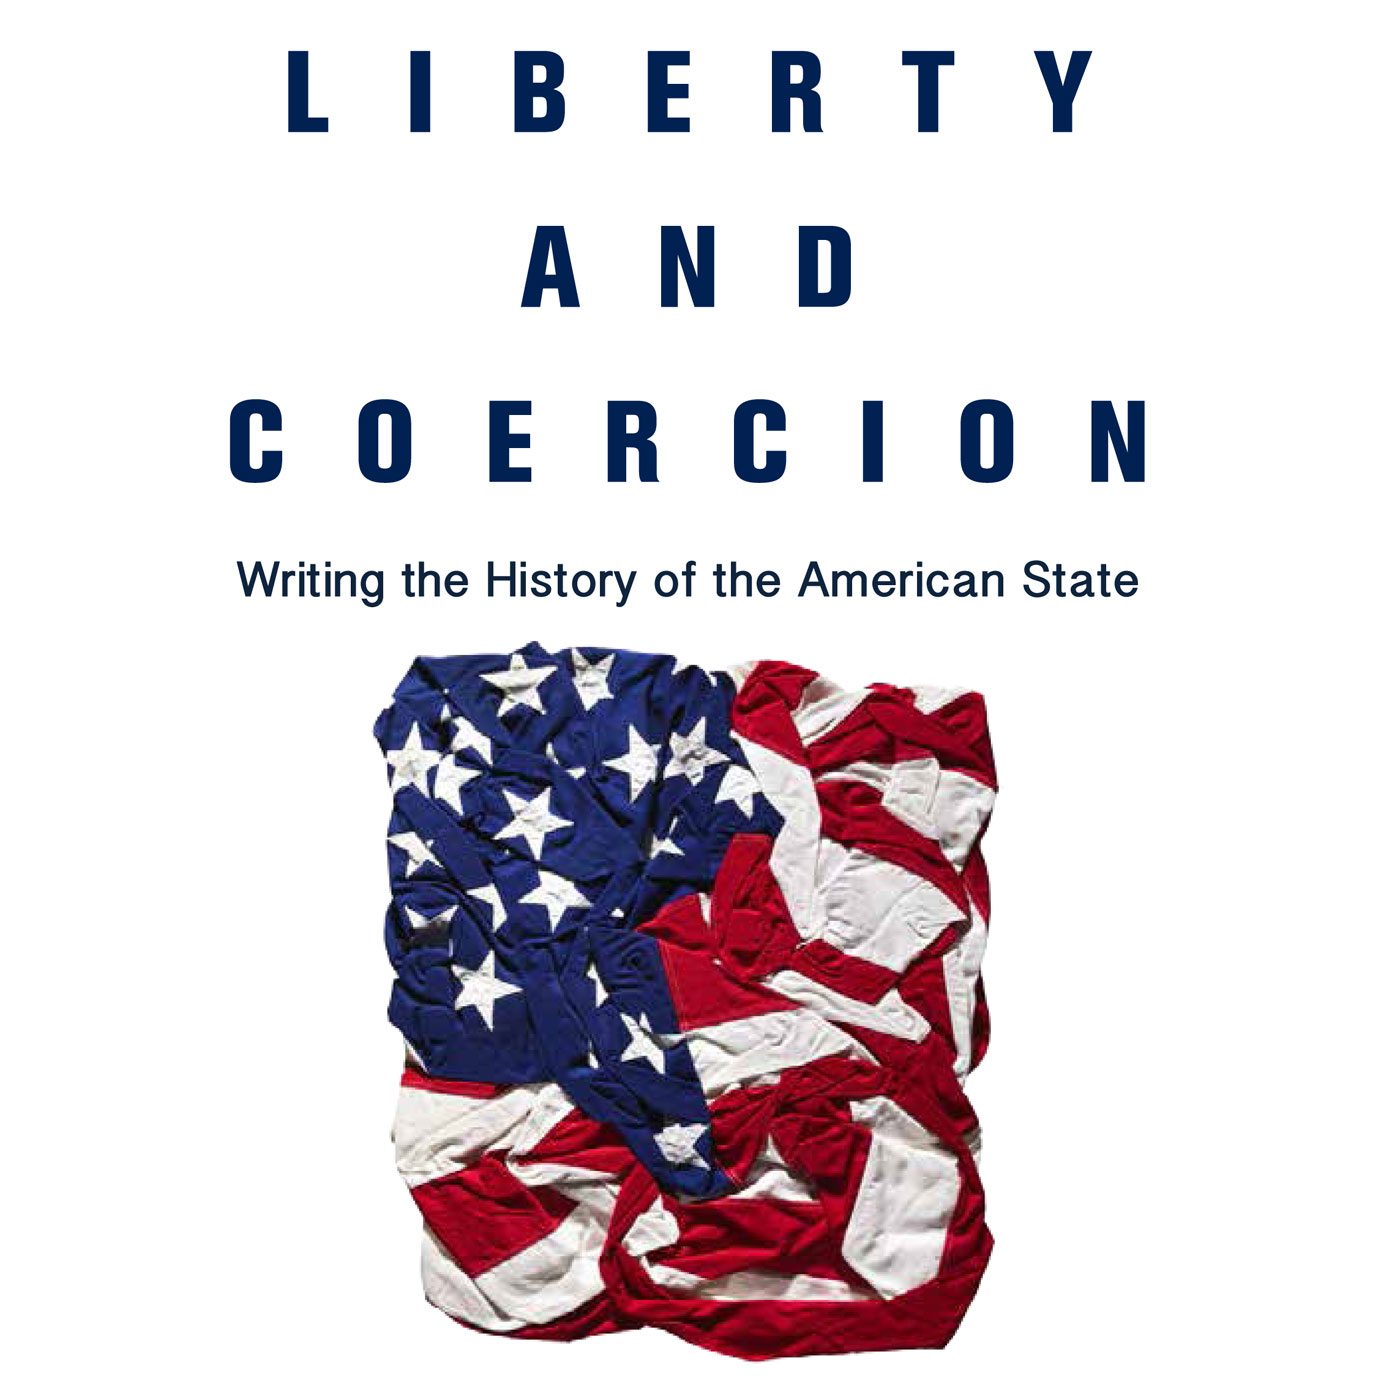 Liberty and Coercion: Writing the History of the American State's image